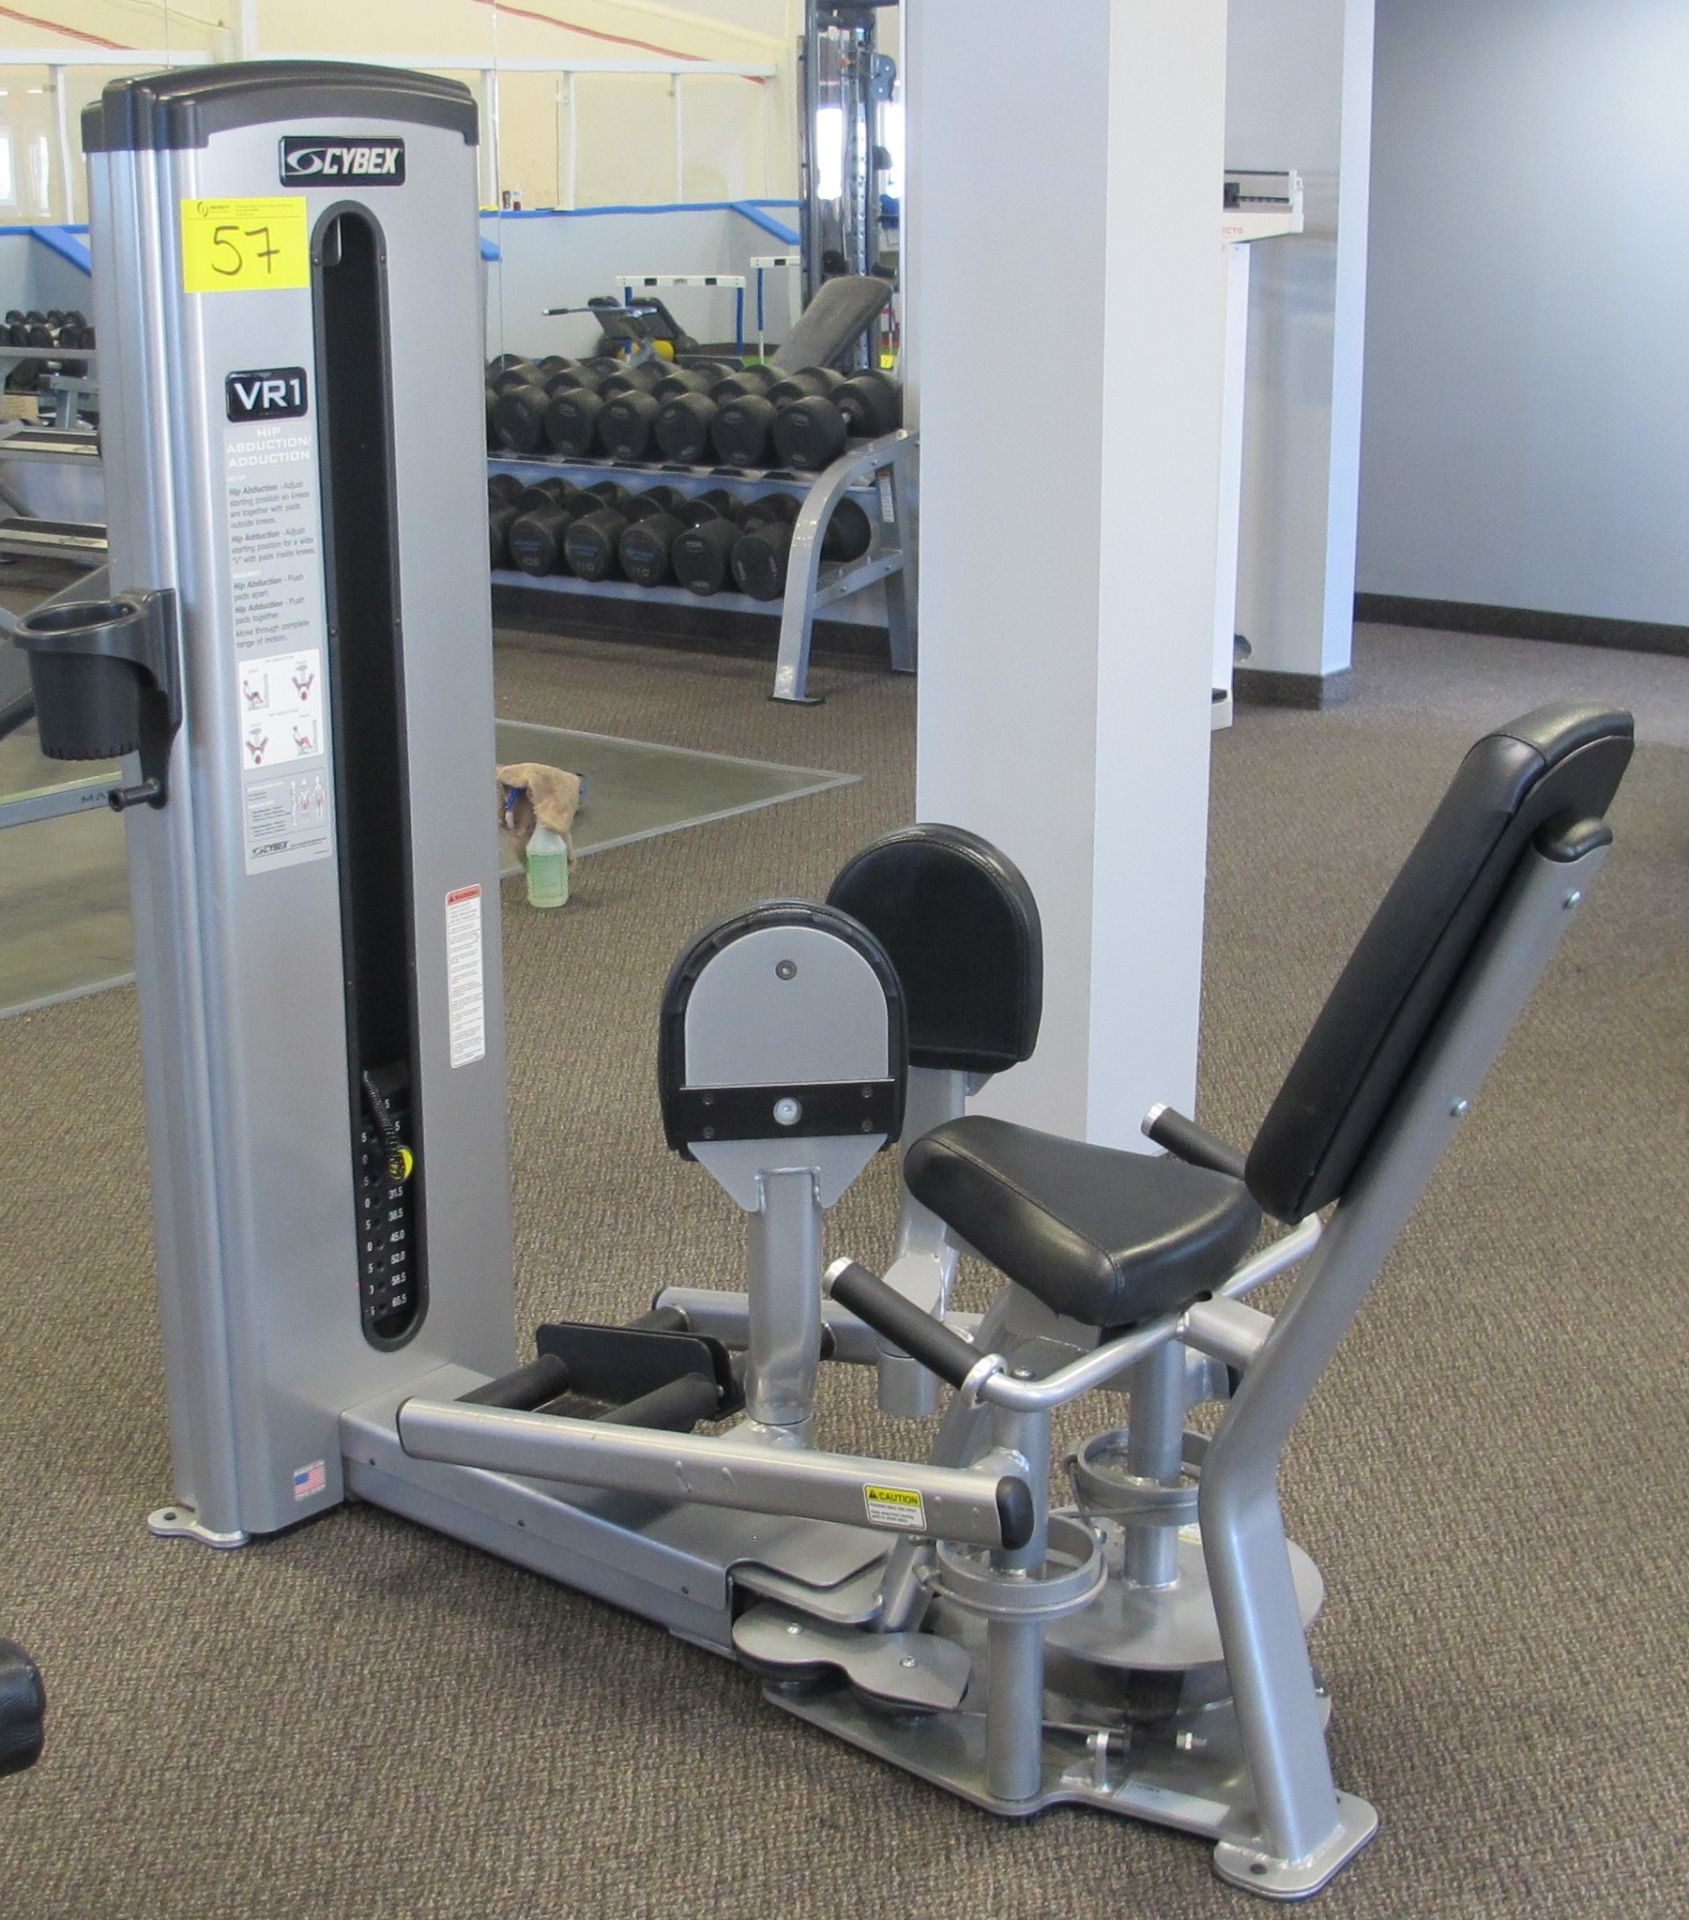 CYBEX VR1 13180-90 Hip Abduction/Adduction Machine - Weight Stack 145lbs